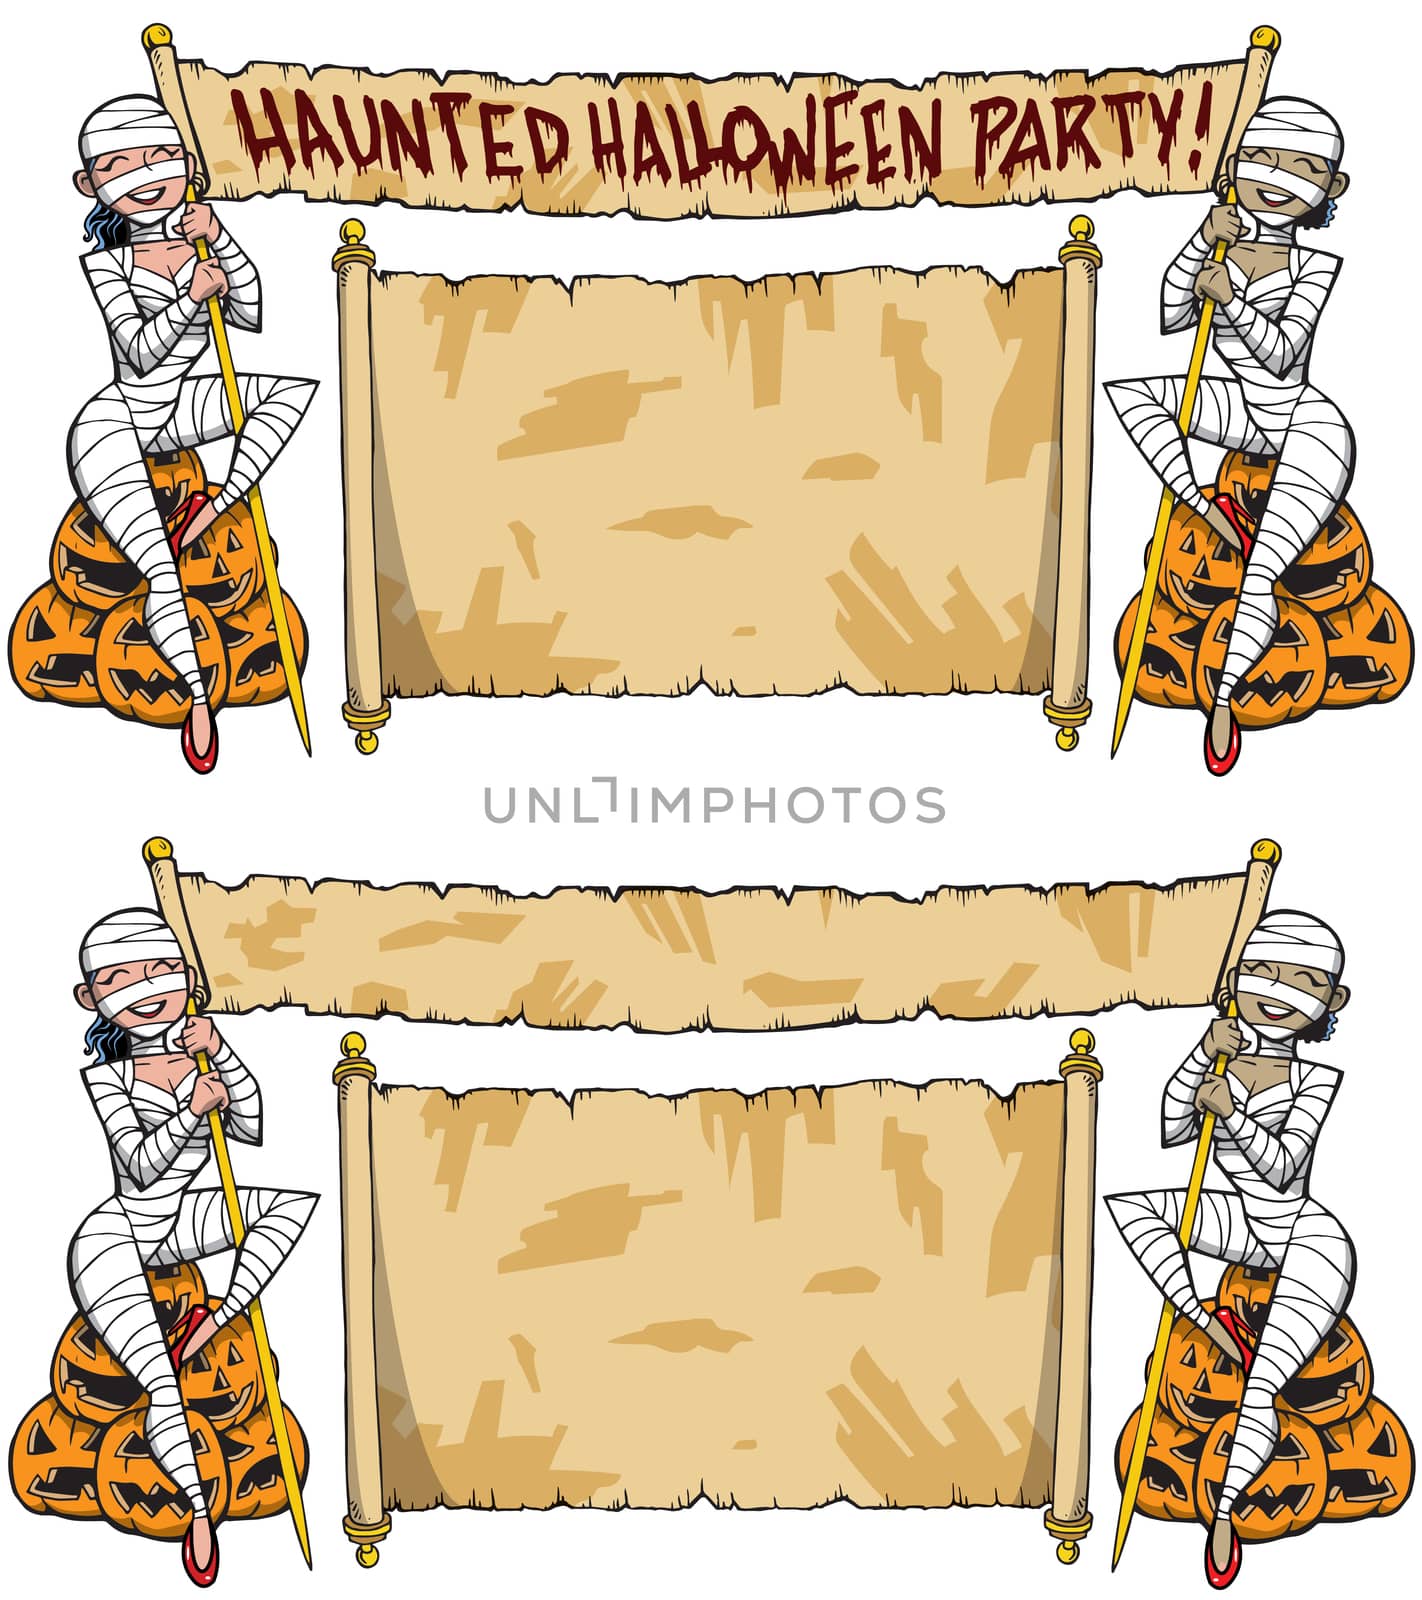 Girls in mummy costumes holding banner Halloween Haunted House Party